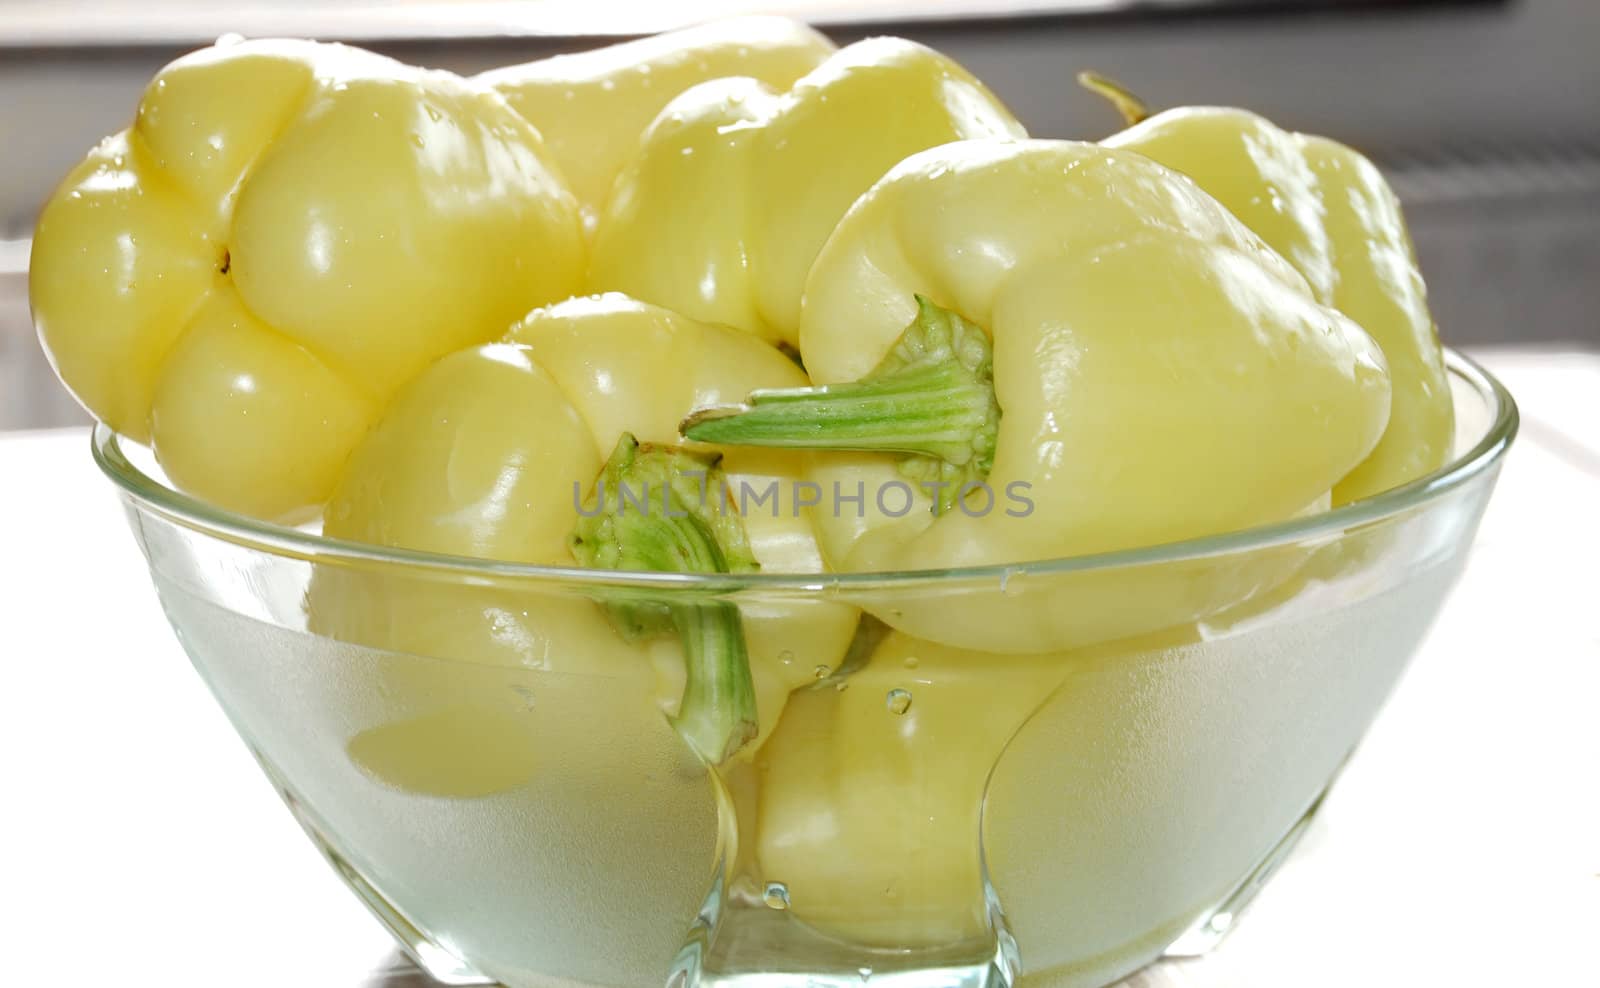 yellow rape juicy paprika in glass bowl on table